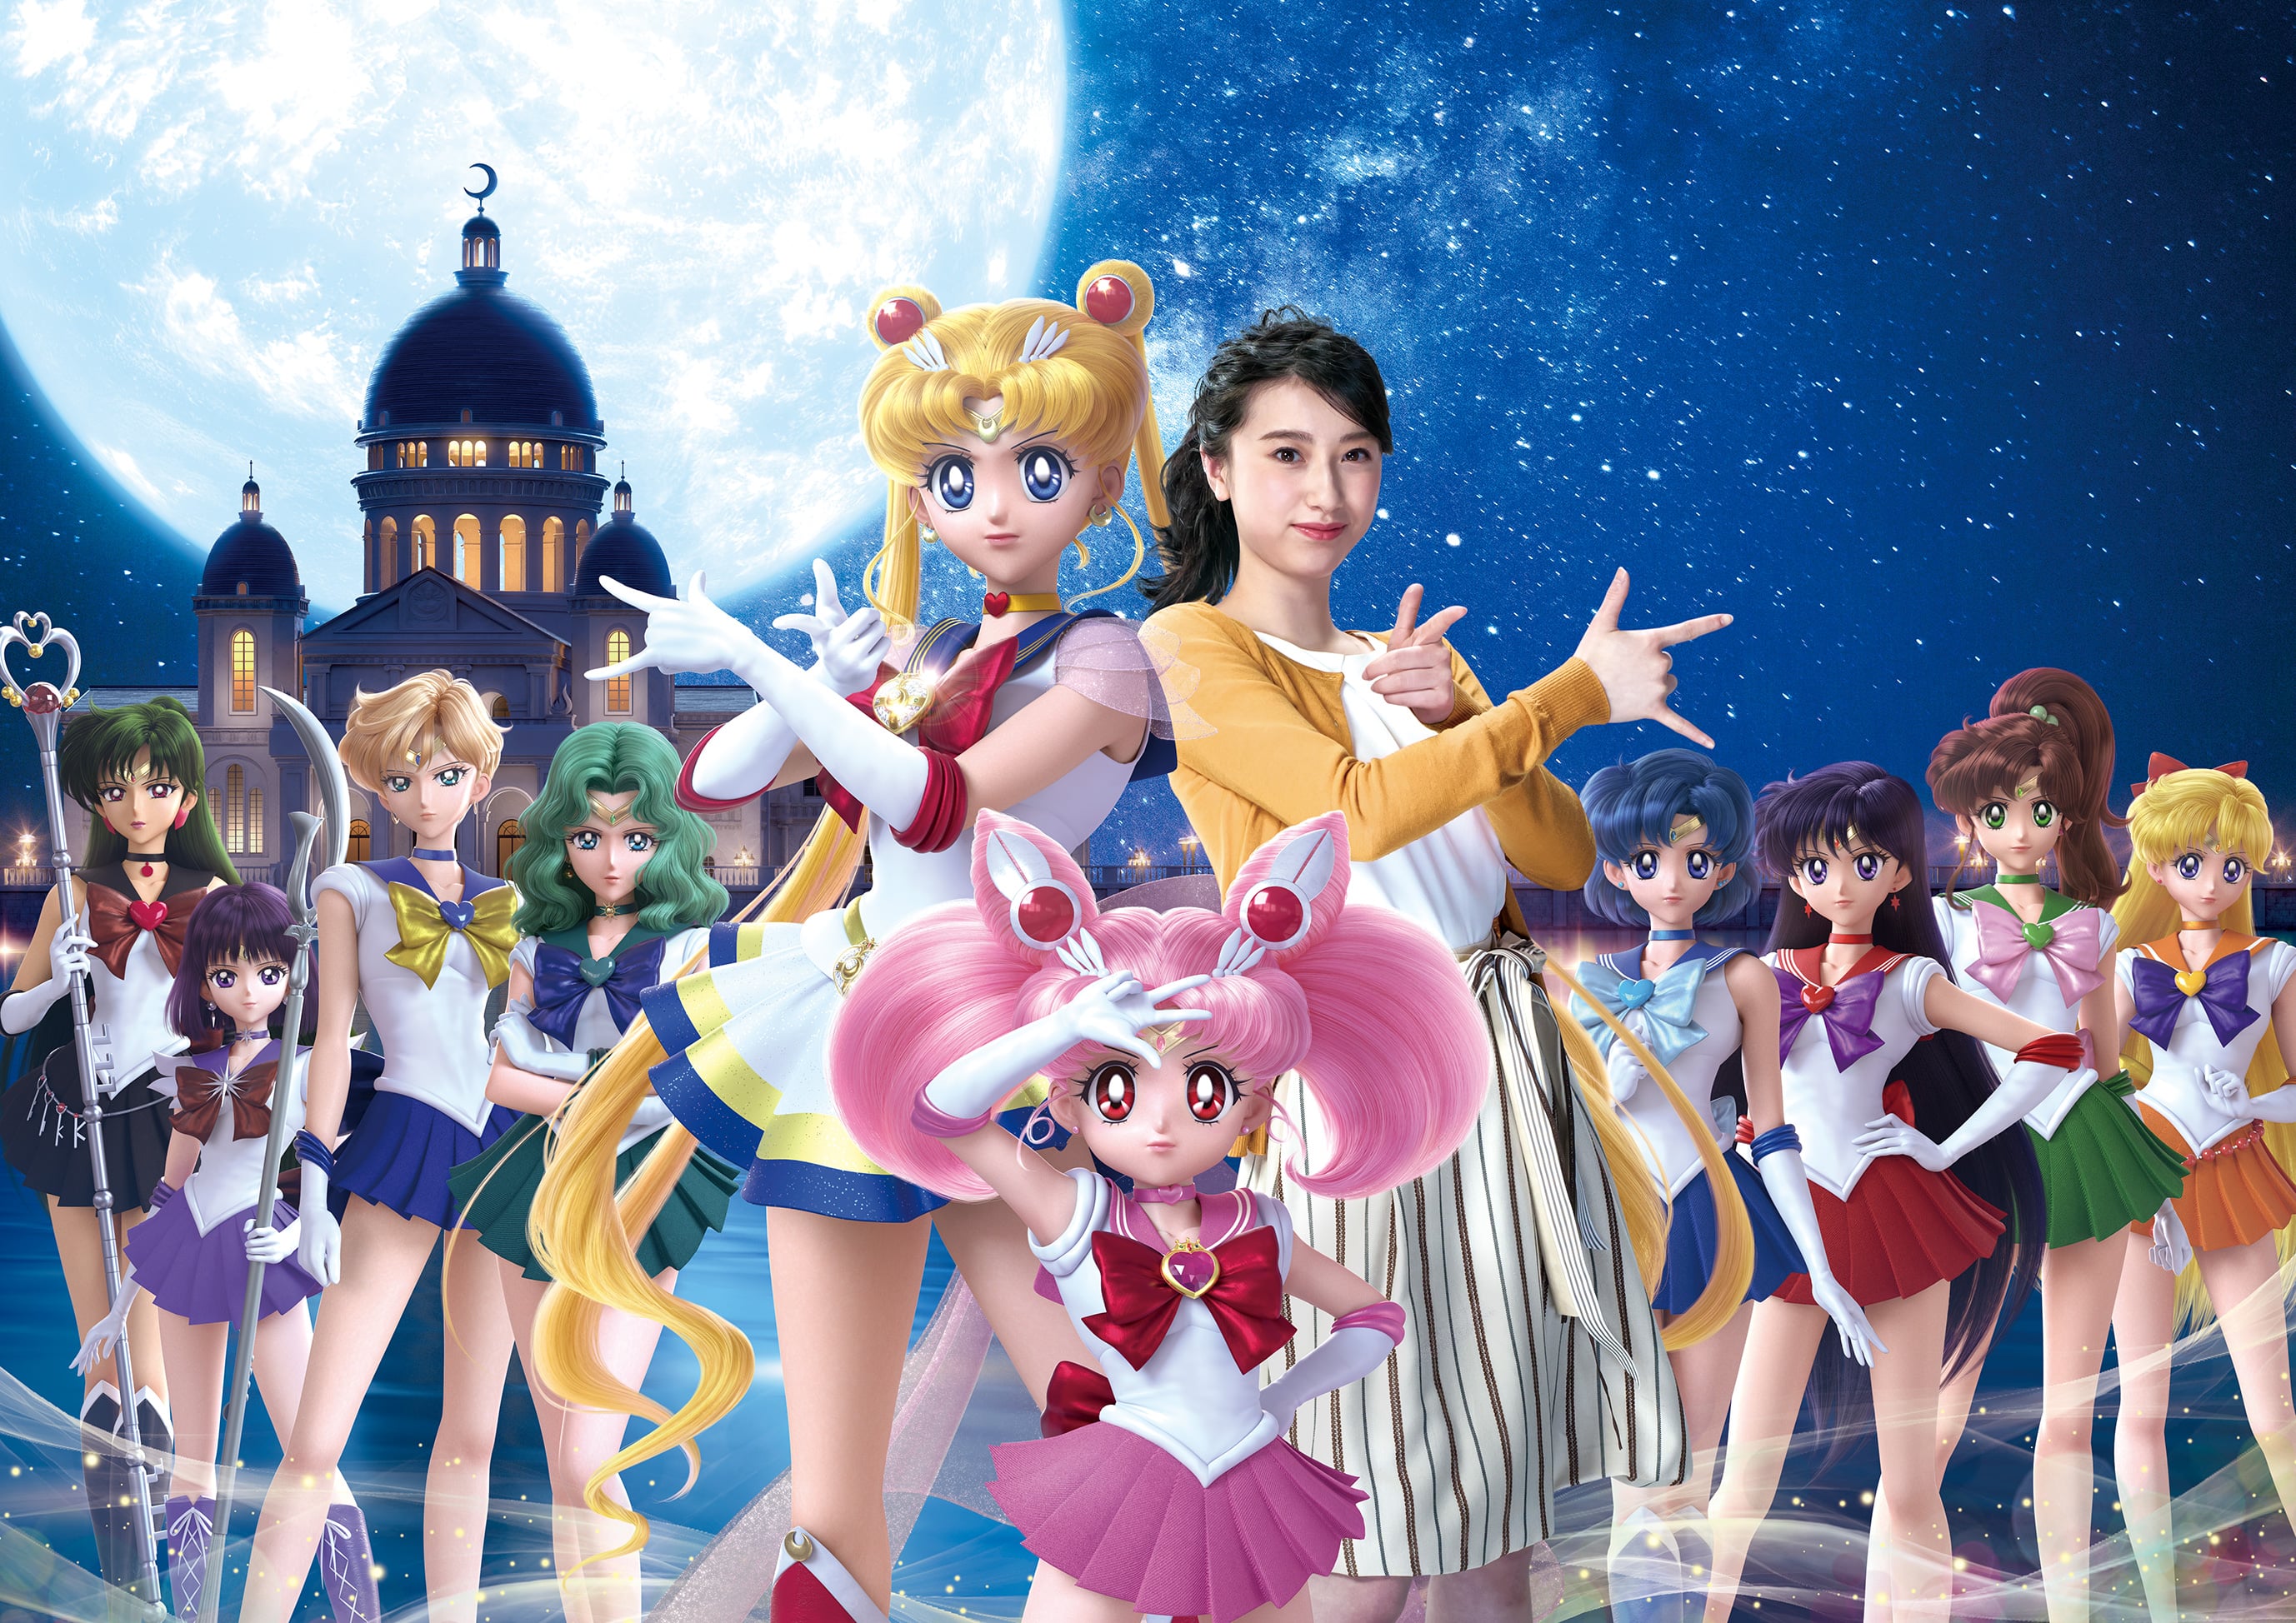 New Sailor Moon Attraction Arriving at Universal Studios Japan This